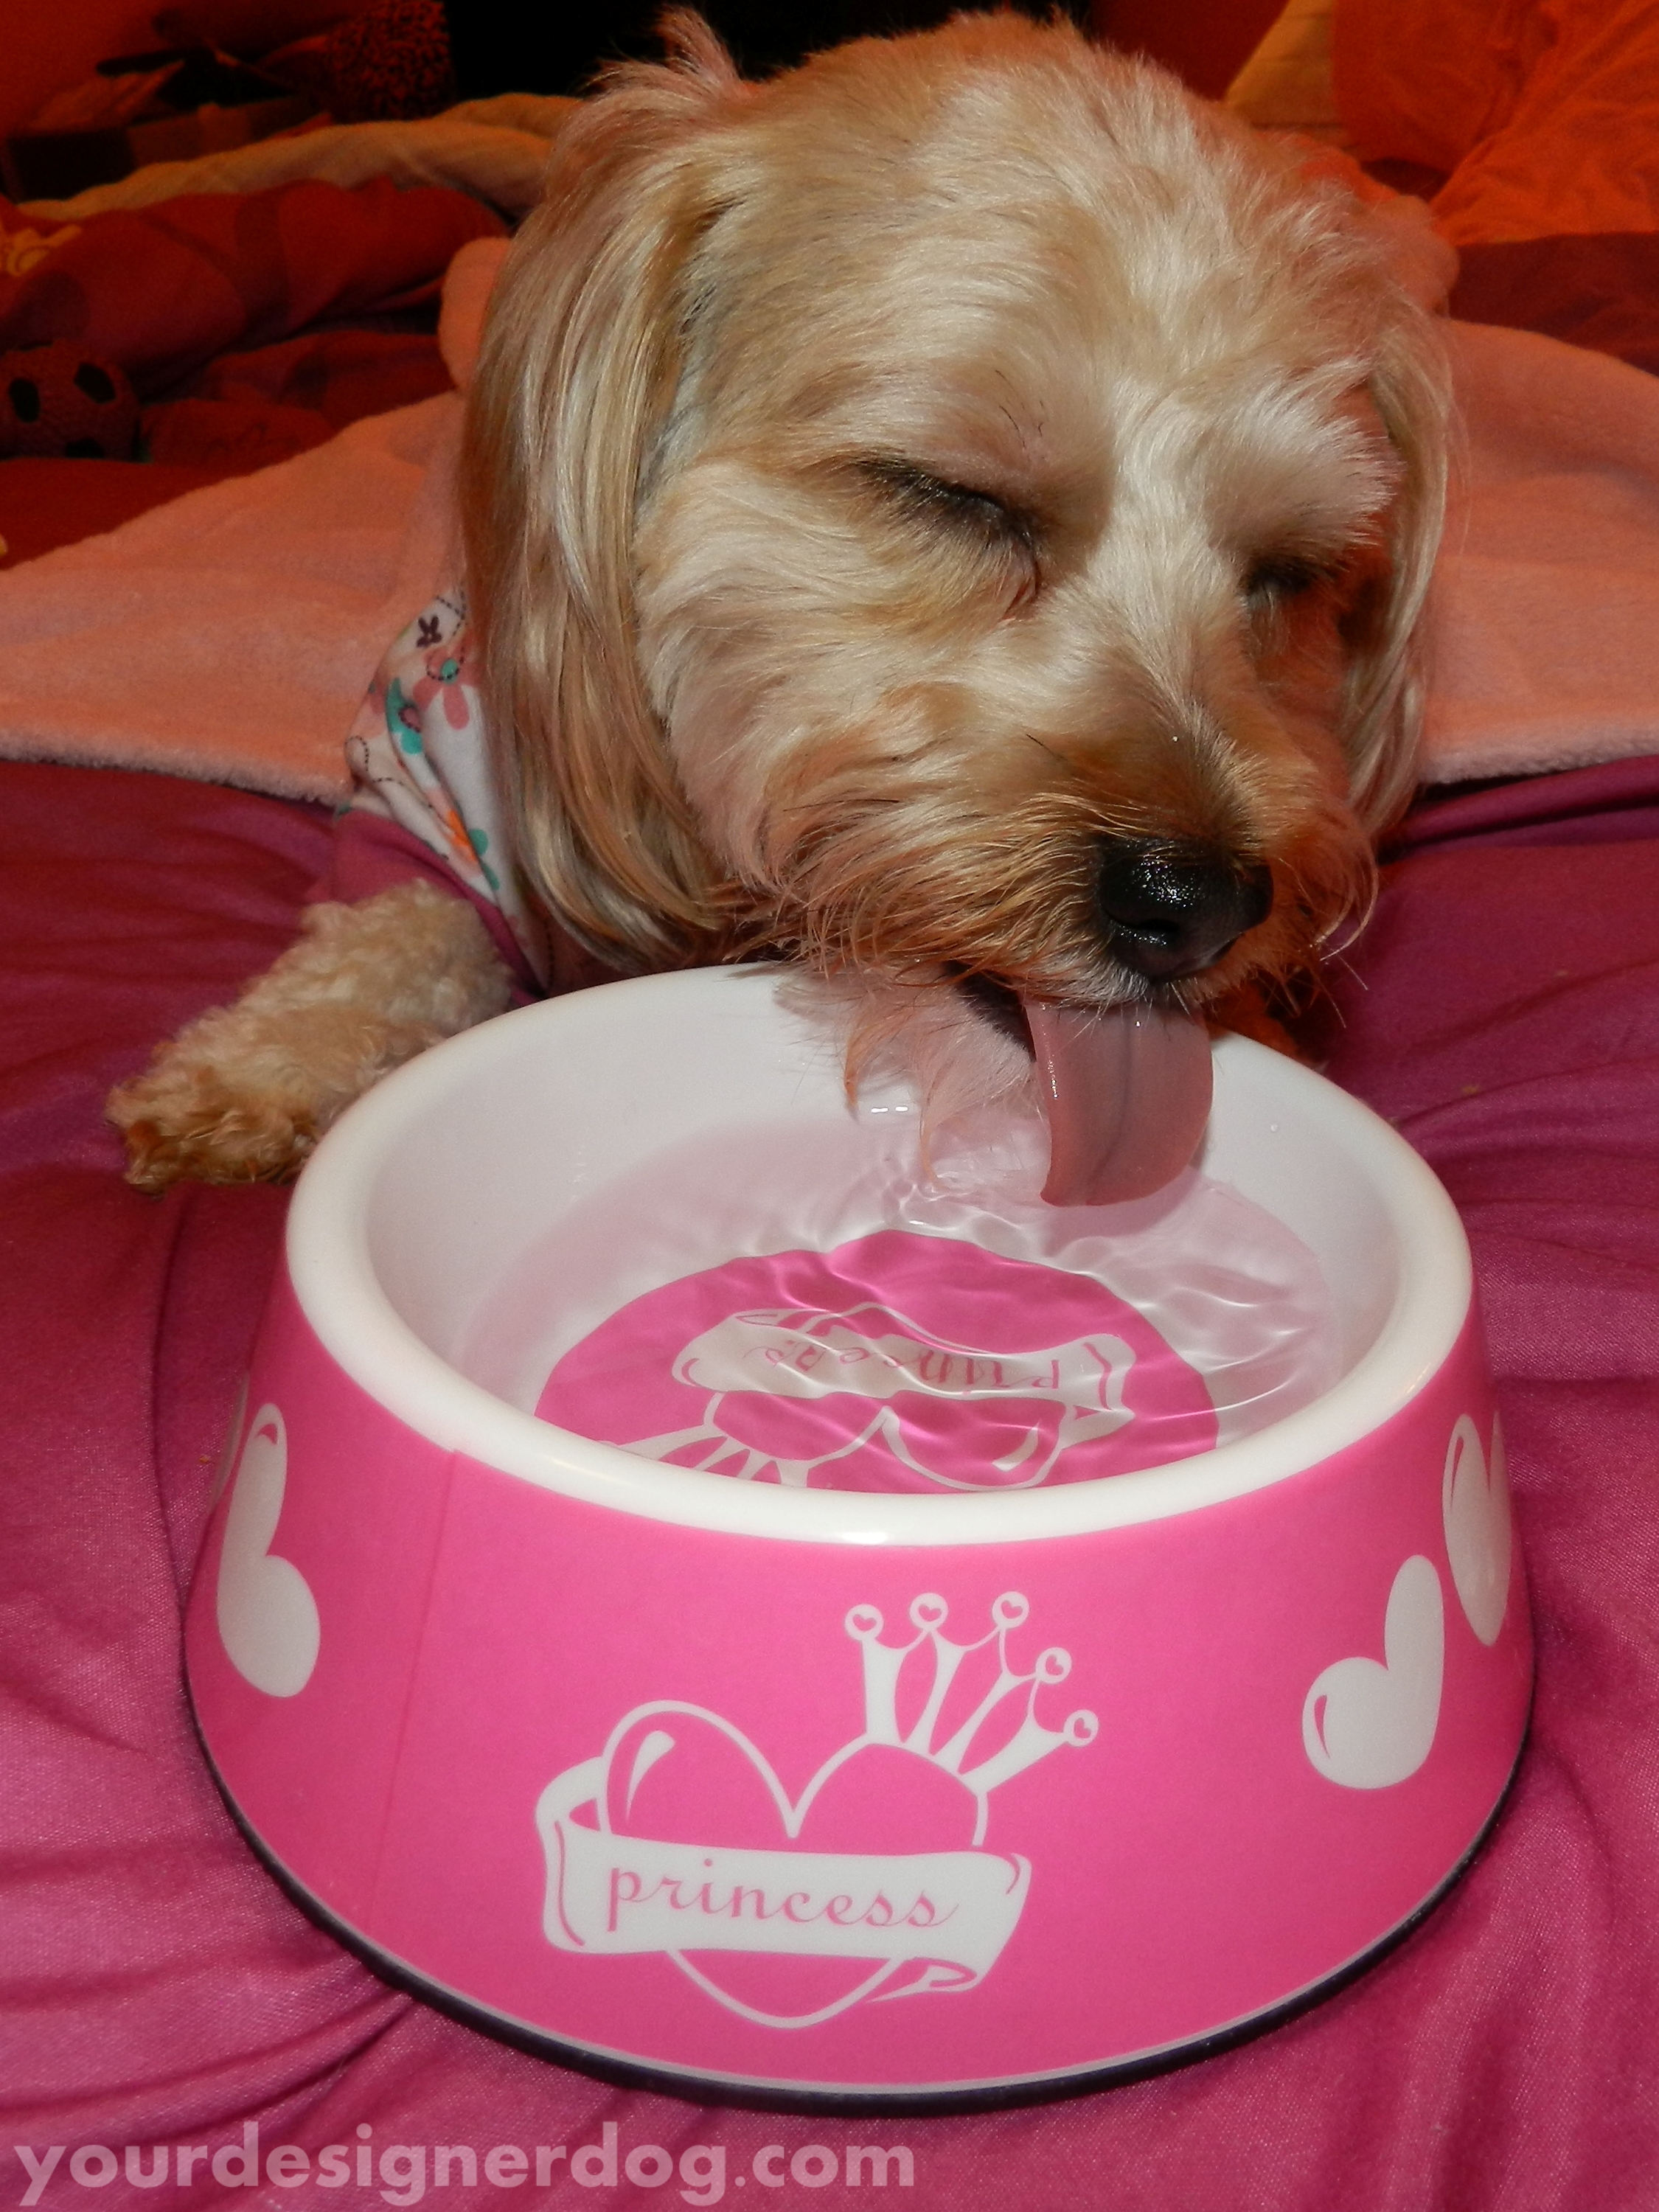 dogs, designer dogs, yorkipoo, yorkie poo, dog bowl, water, princess, tongue out